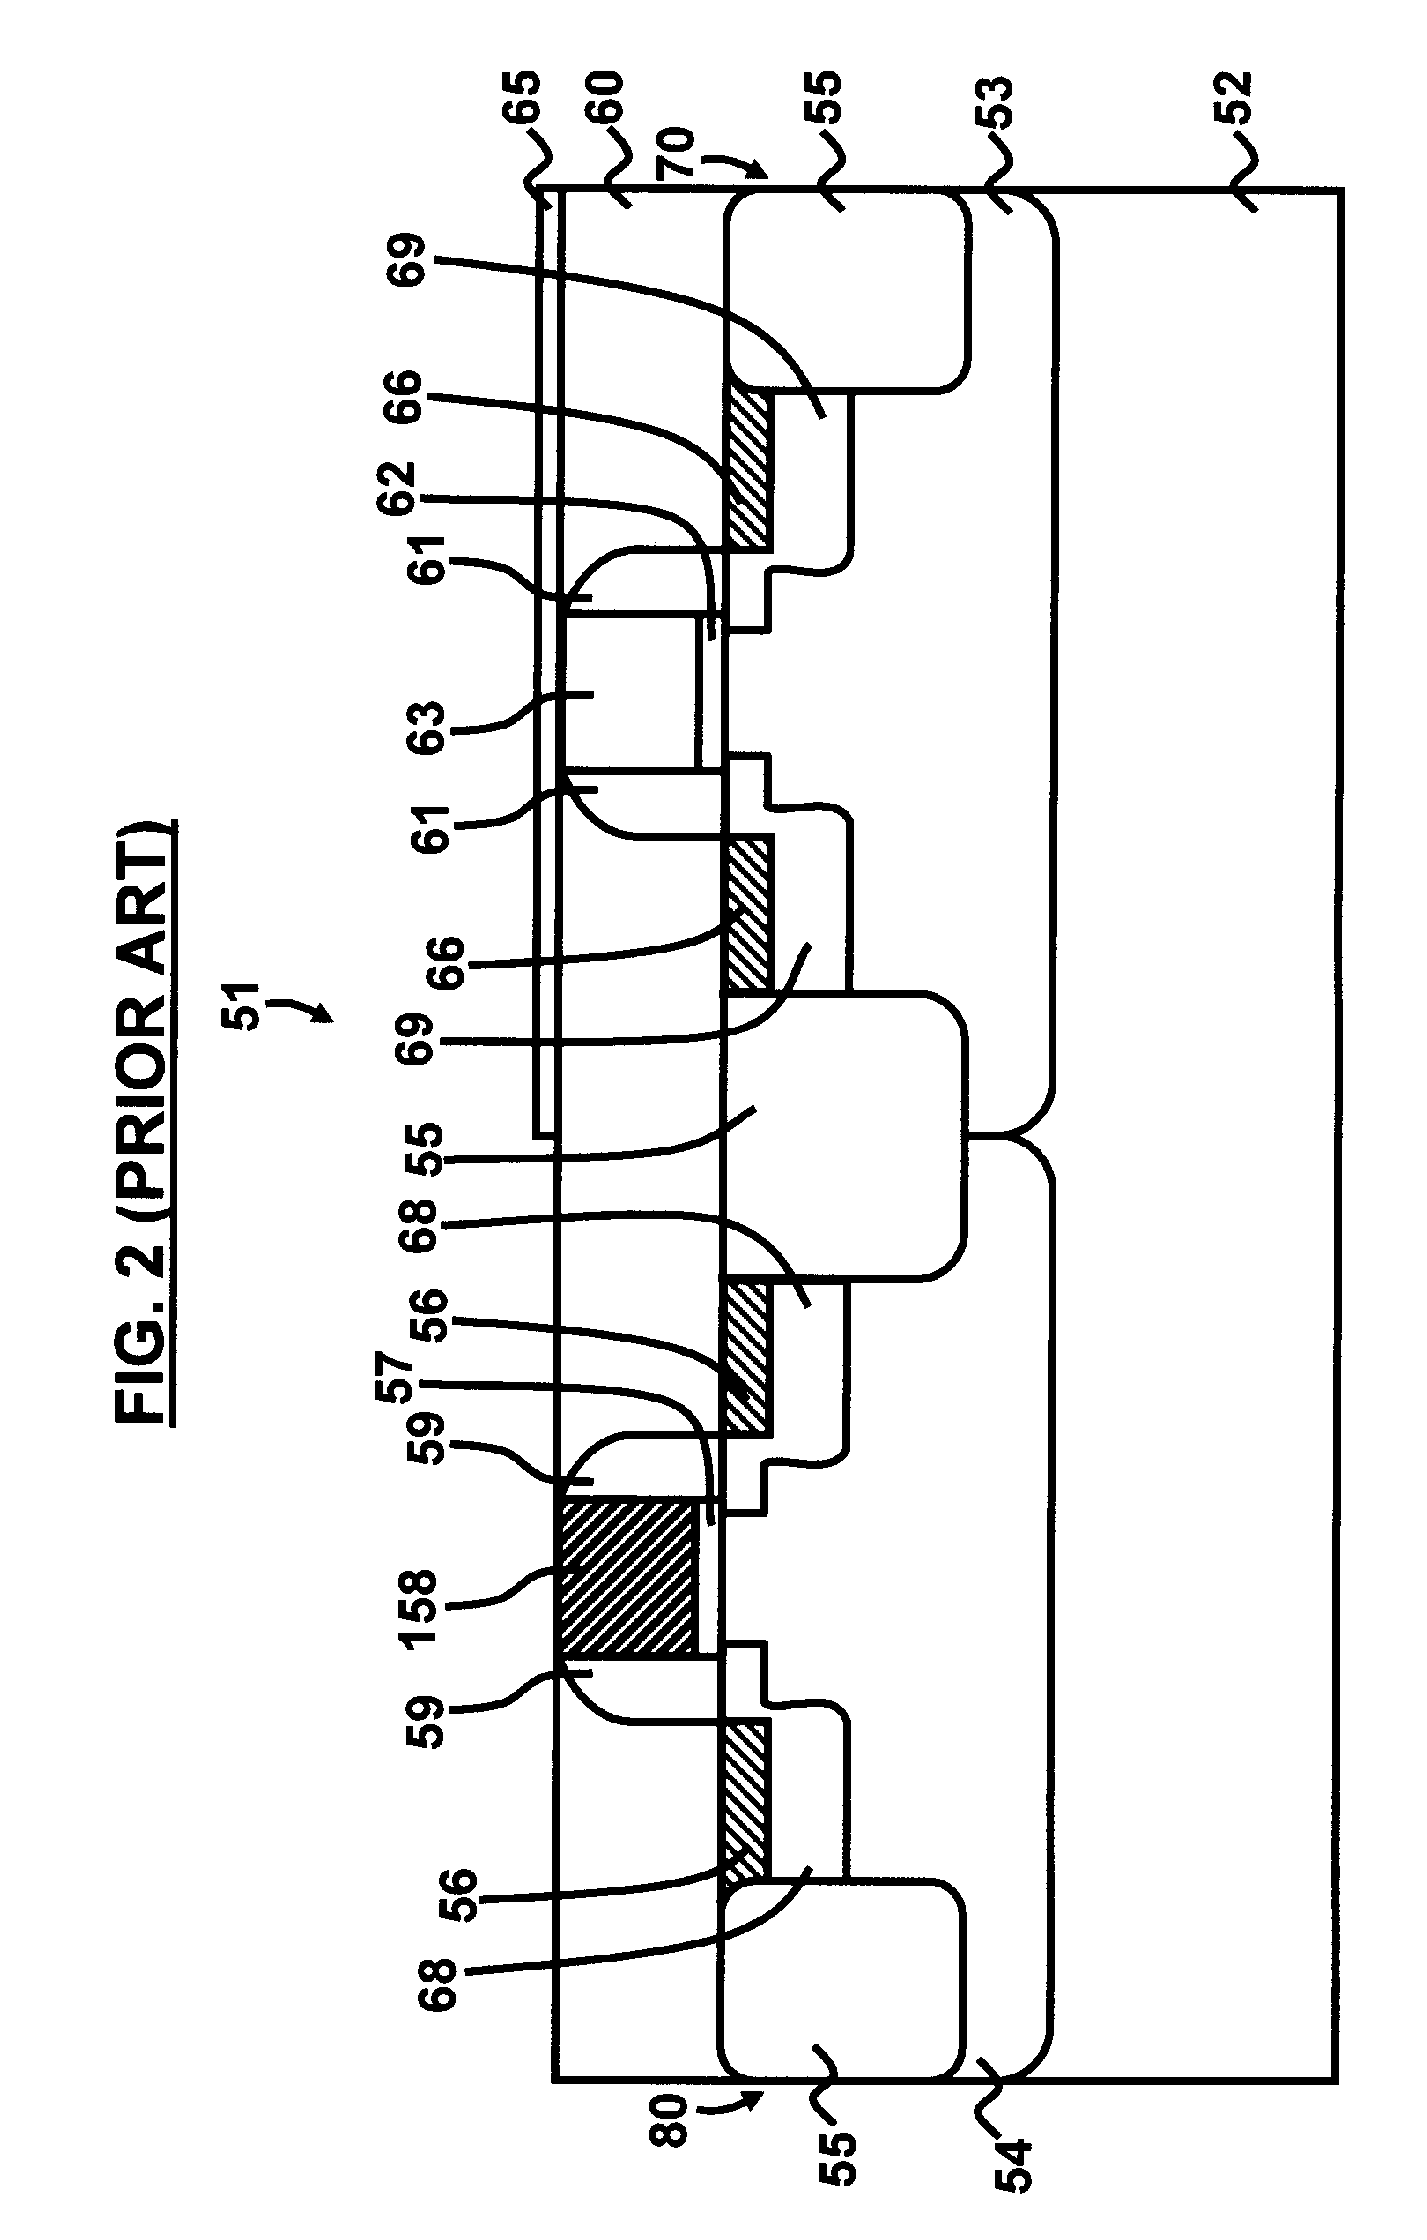 Method for forming self-aligned dual fully silicided gates in CMOS devices